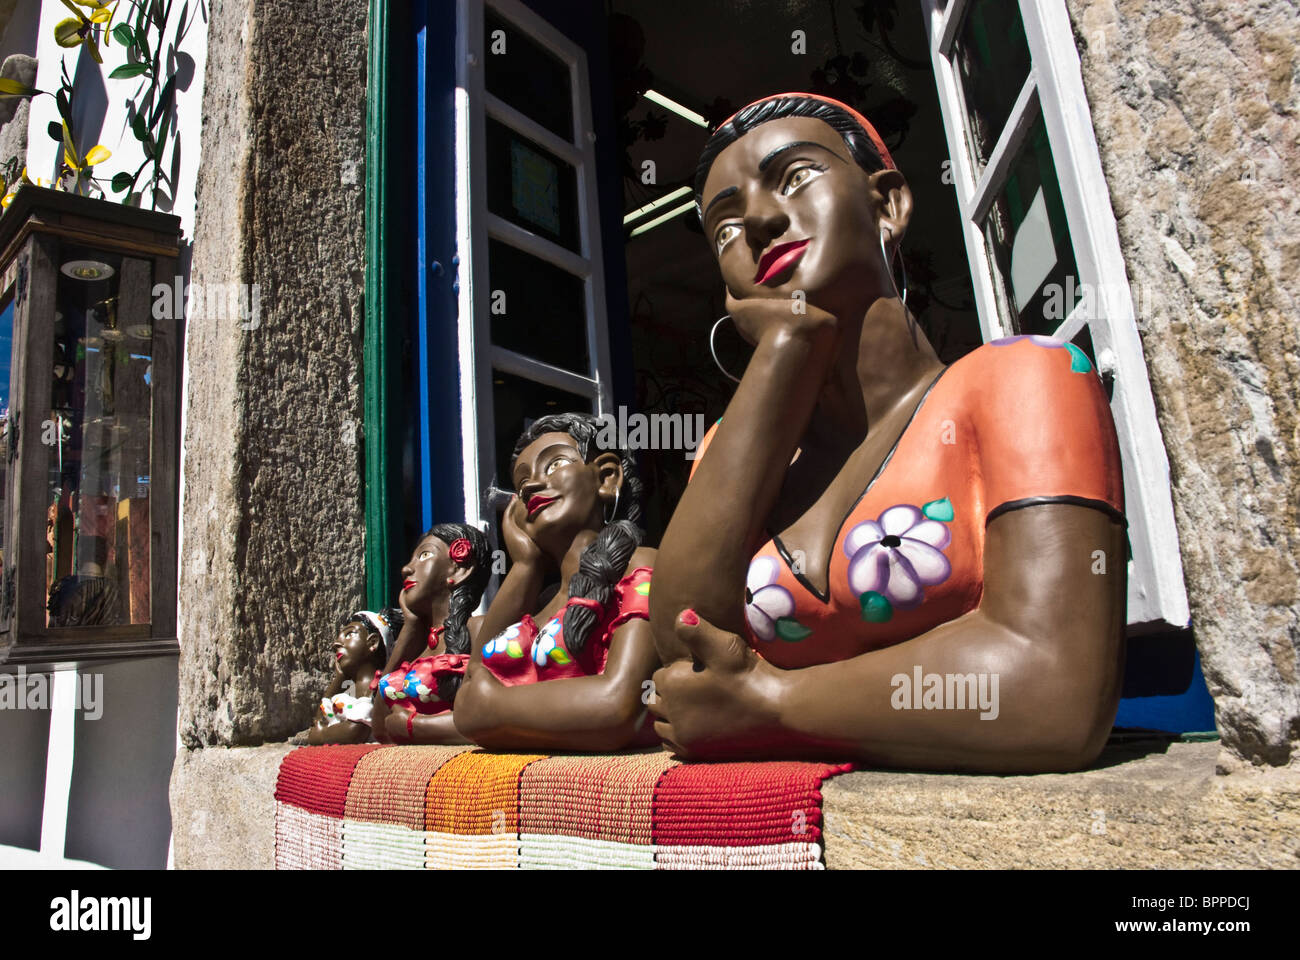 A row of namoradeiras in window of store in Ouro Preto, Brazil Stock Photo